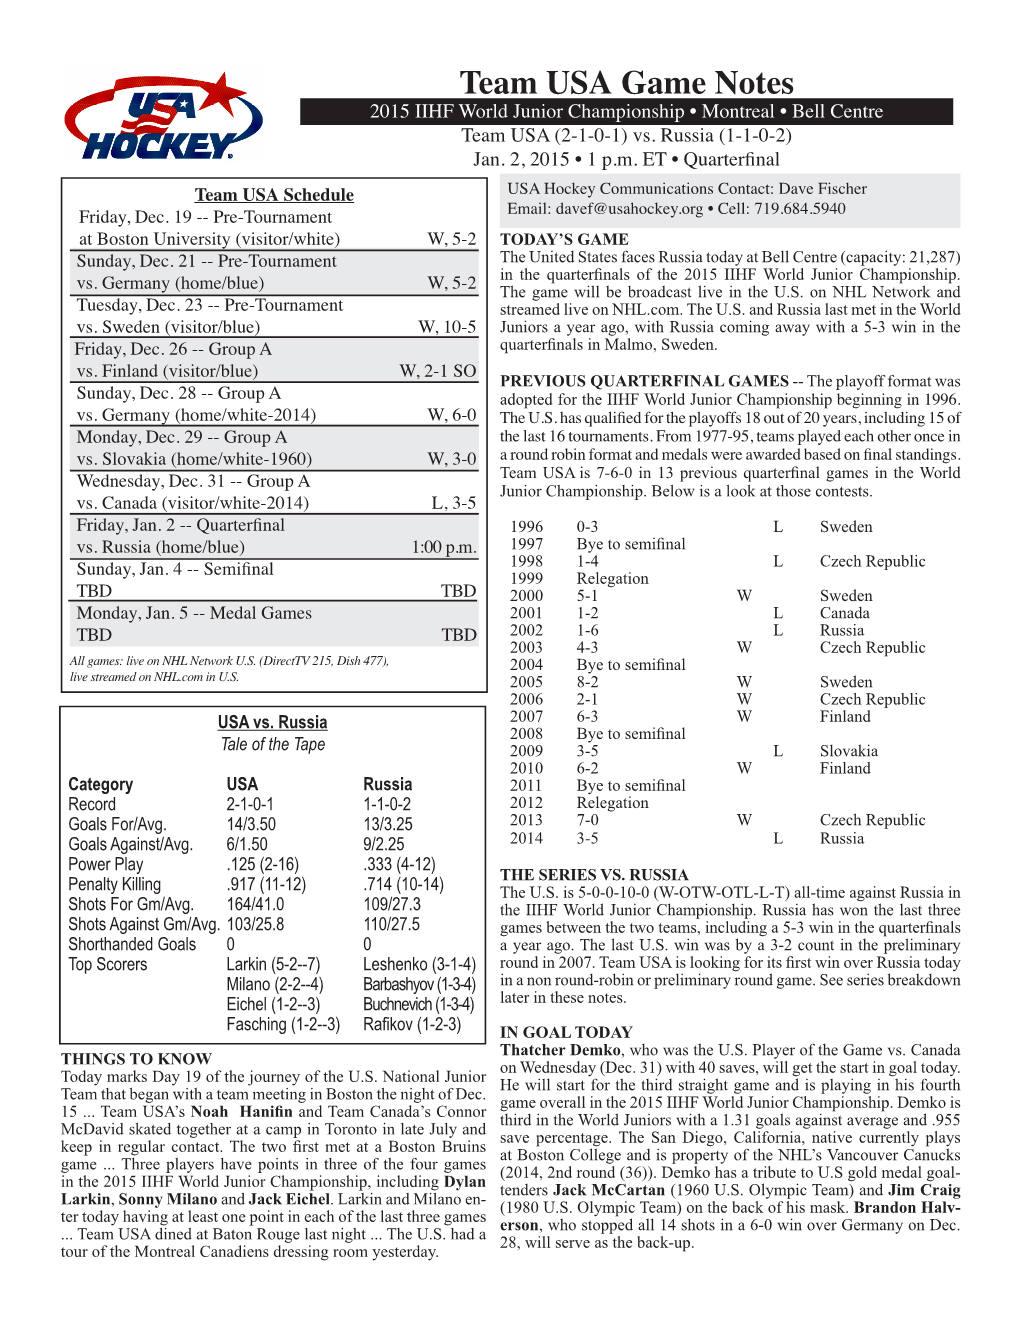 Game Notes Vs. Russia • Jan